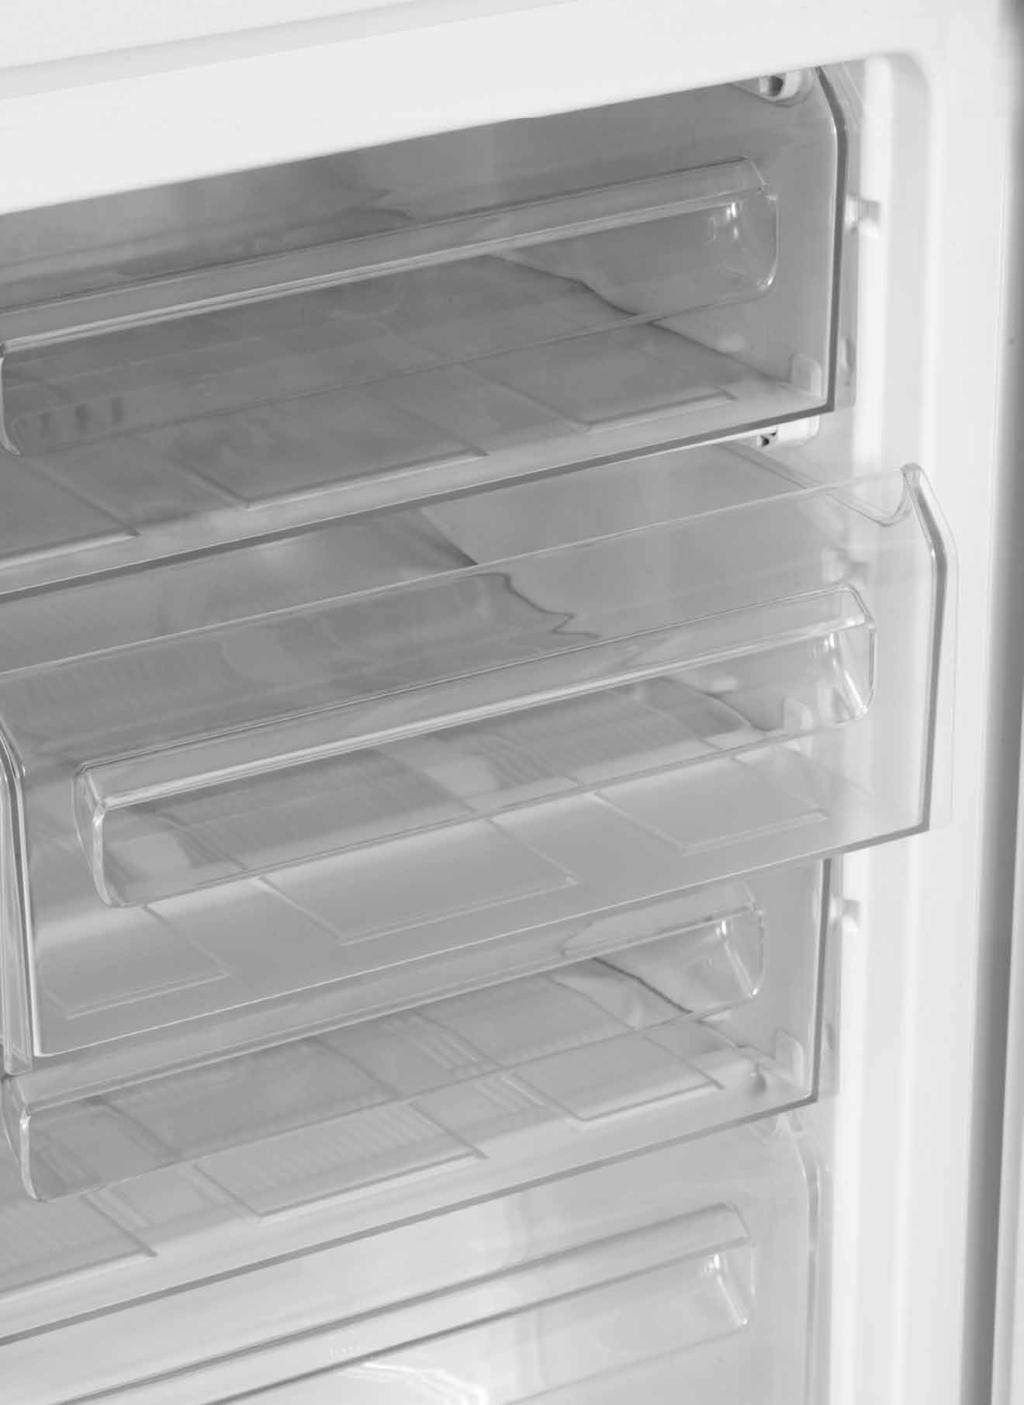 USER MANUAL Bar Fridges with Ice Box, All Refrigerators and